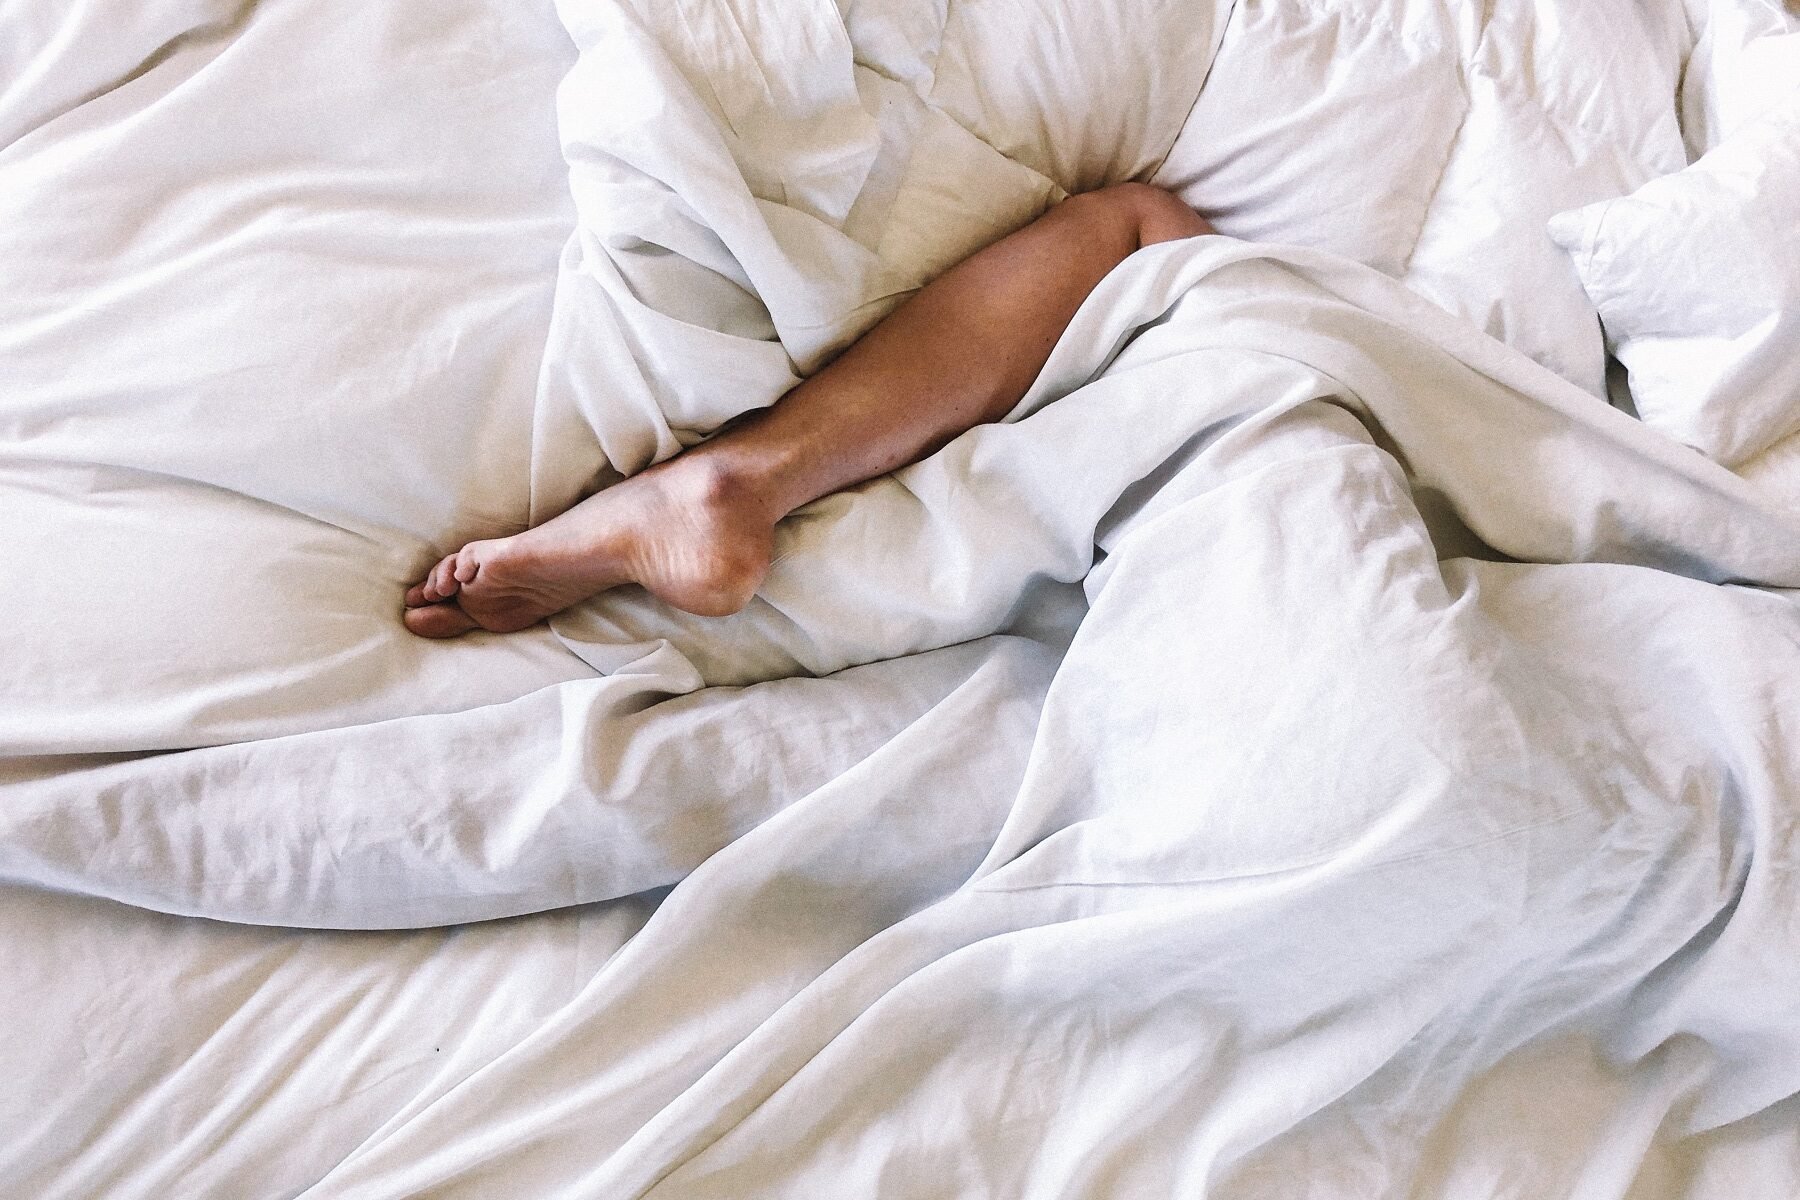 Woman wrappend in white sheet on he bed, only her leg is showing